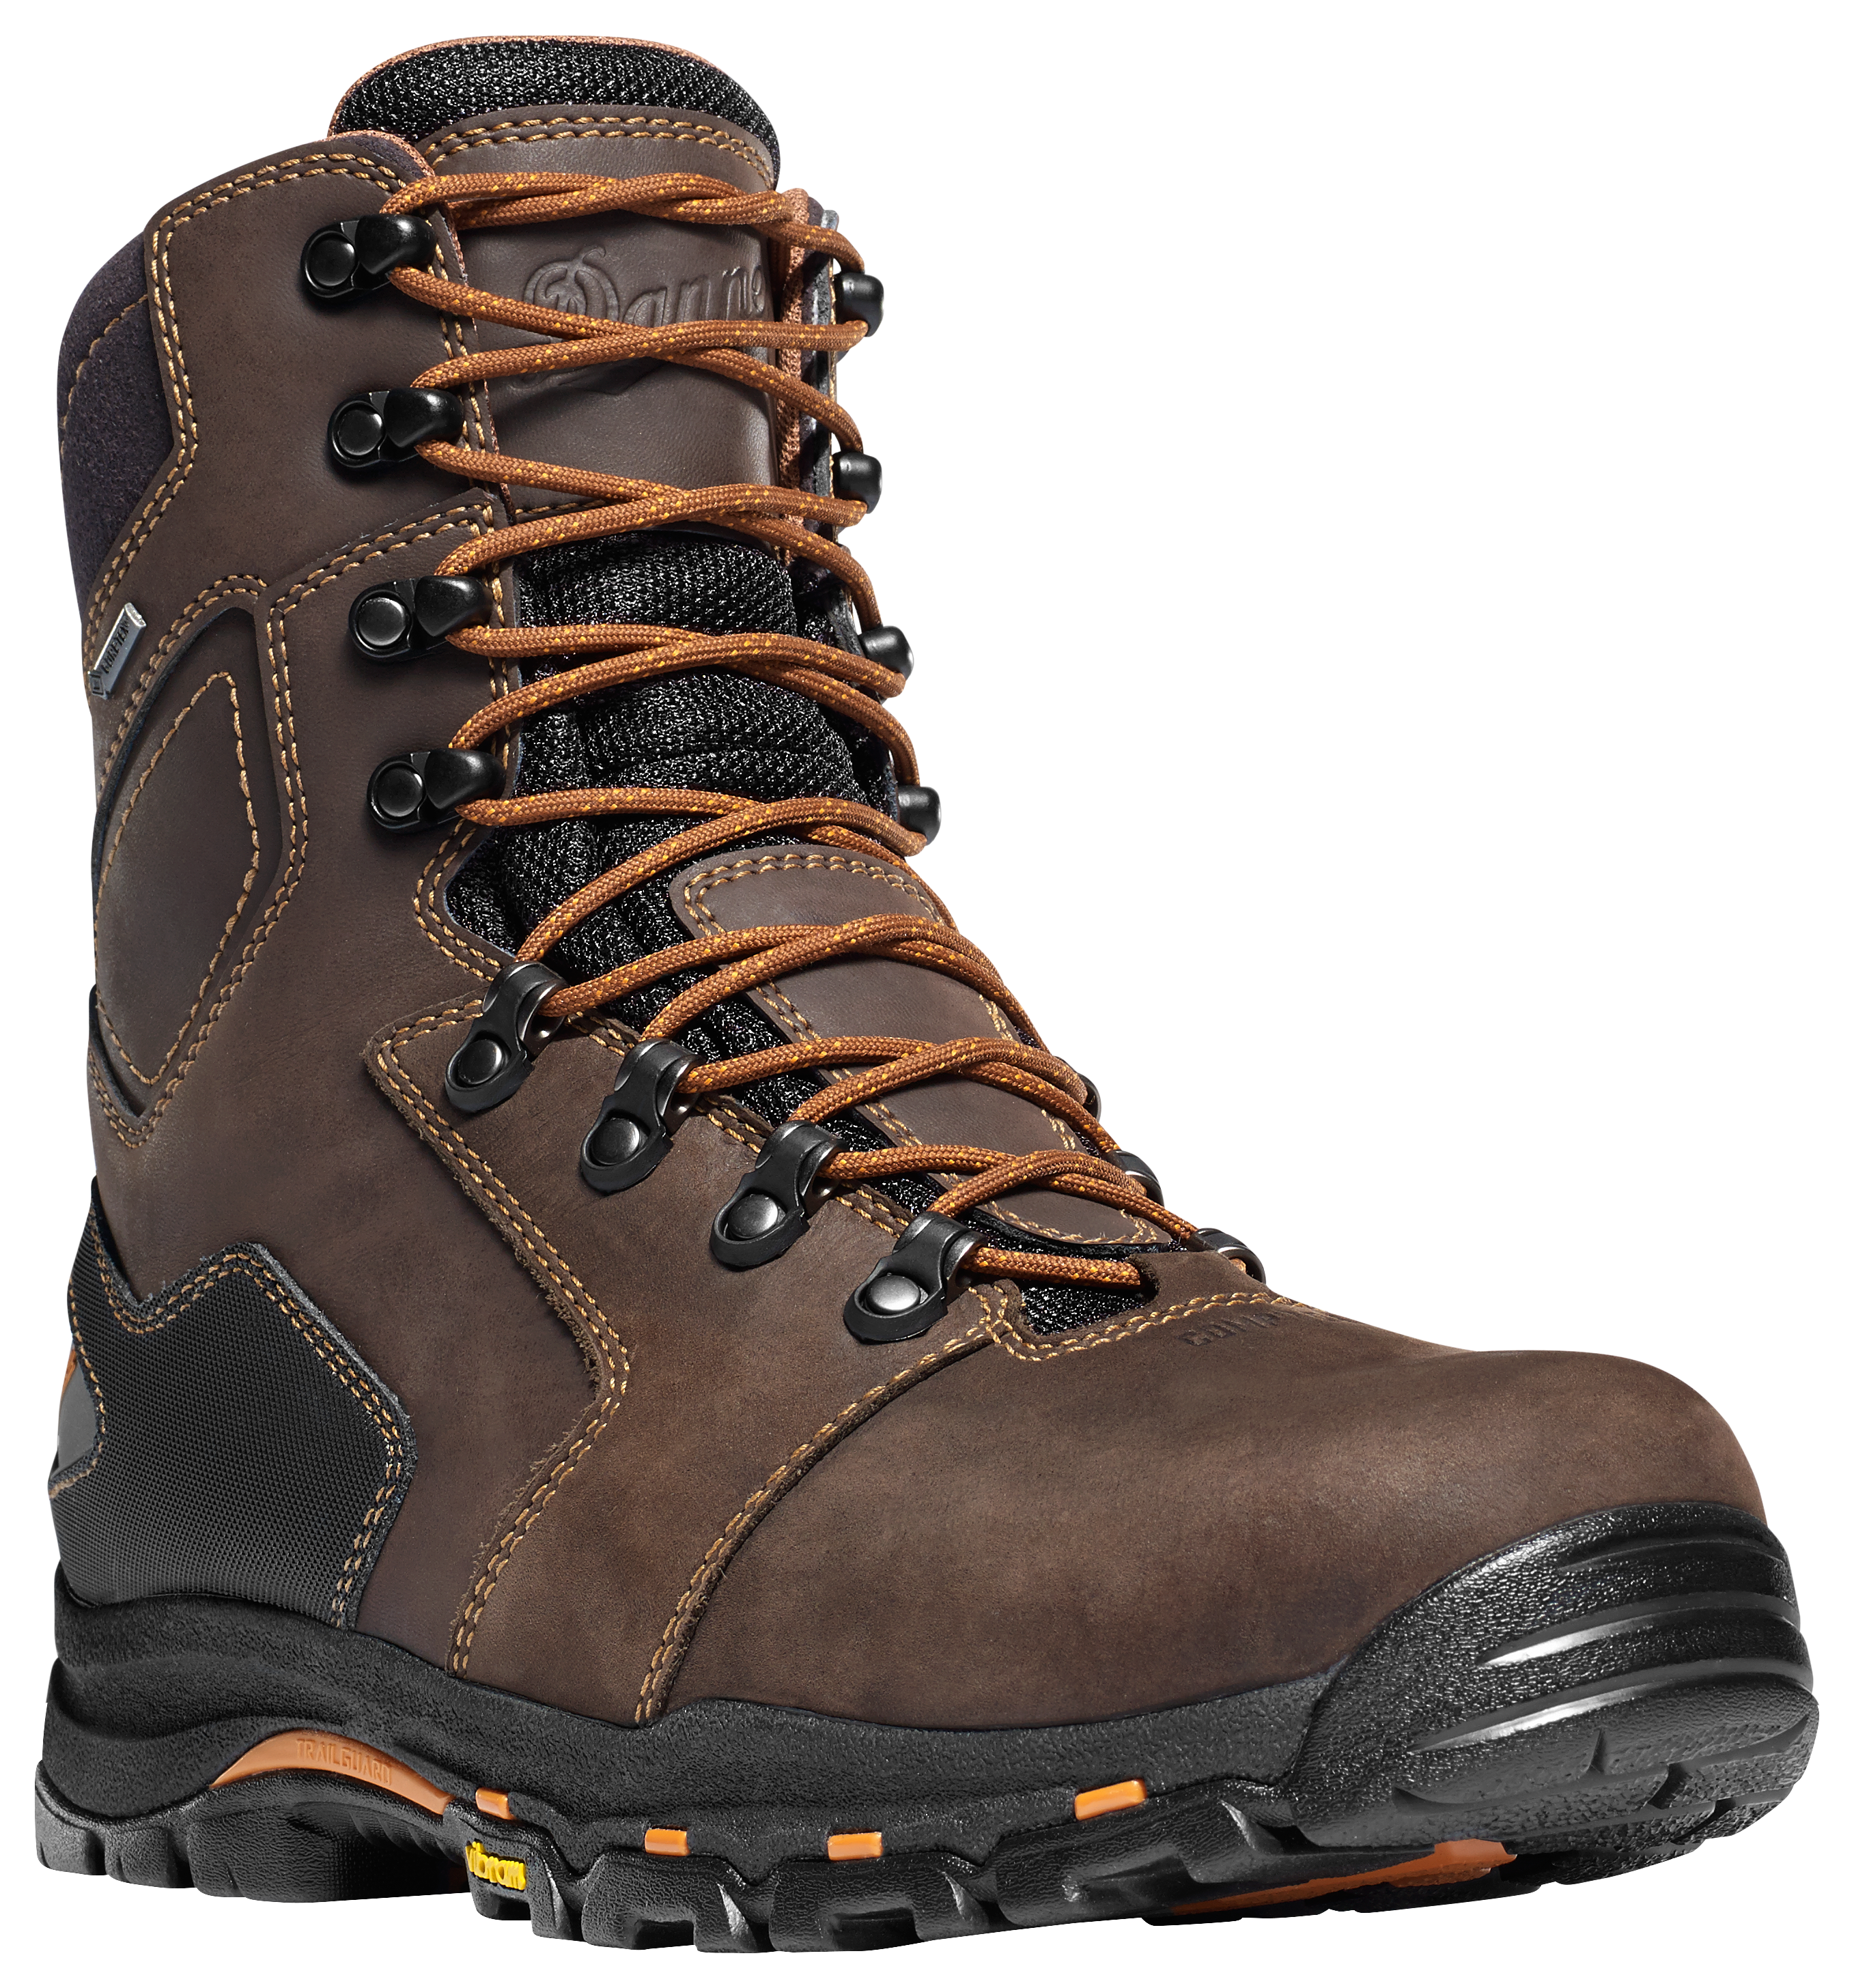 Danner Vicious GORE-TEX Composite Toe Work Boots for Men - Brown - 11W